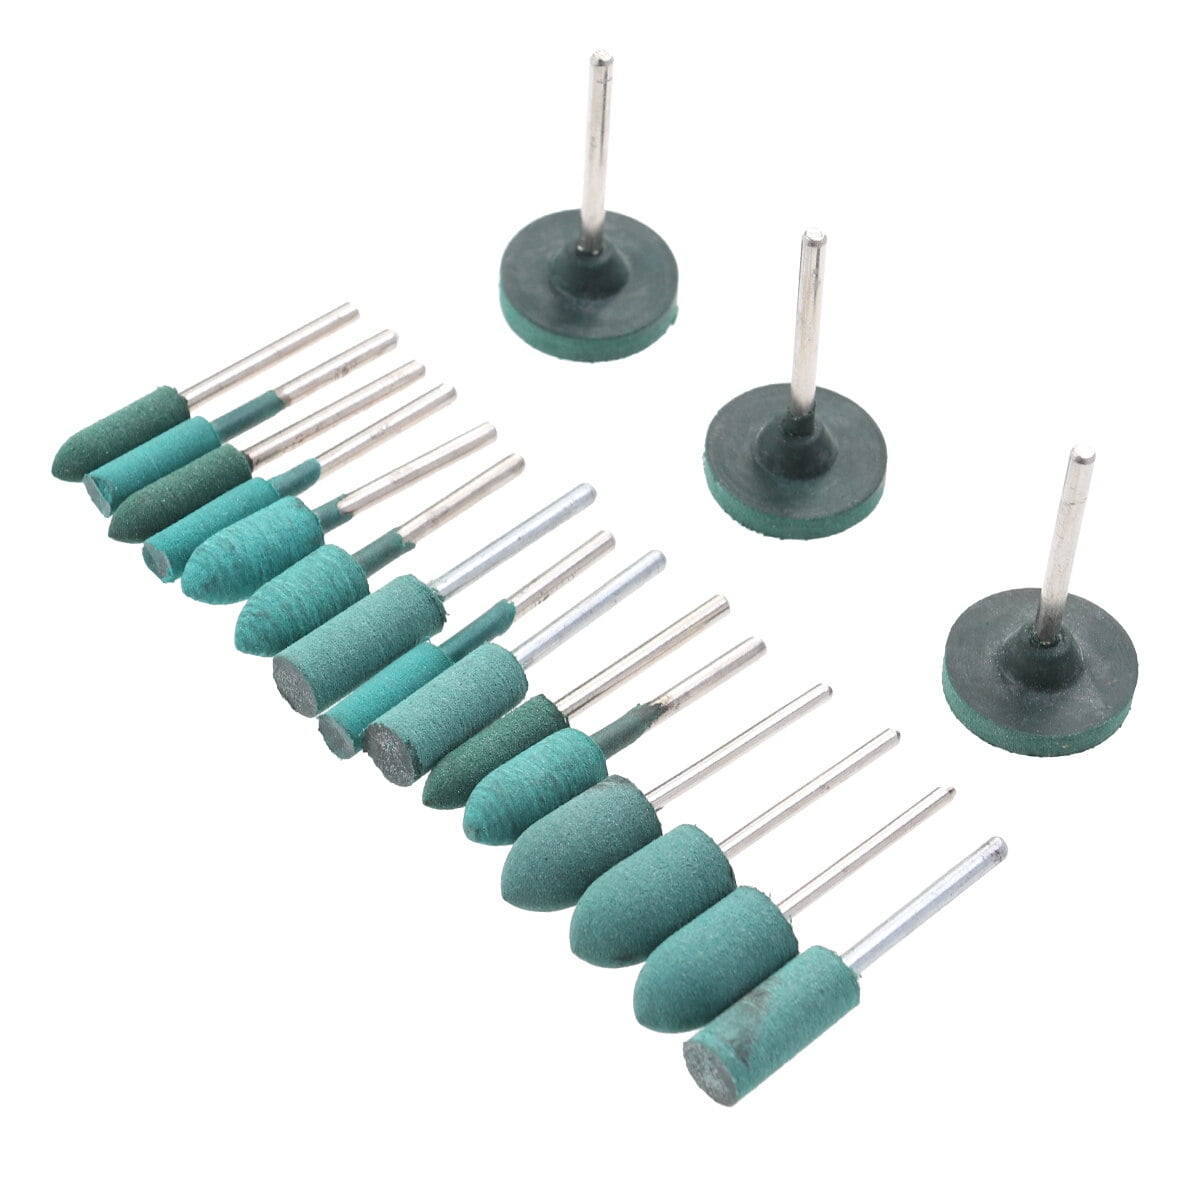 15pcs Polishing Pad, TSV Buffing Wheel Kit, Buffing Wheel Head for Drill  (Cone/Column/Cylinder) with 1/4inch Drill Shank, No Scratch the Surface for  Grinding Polishing Sharpening and Deburring 